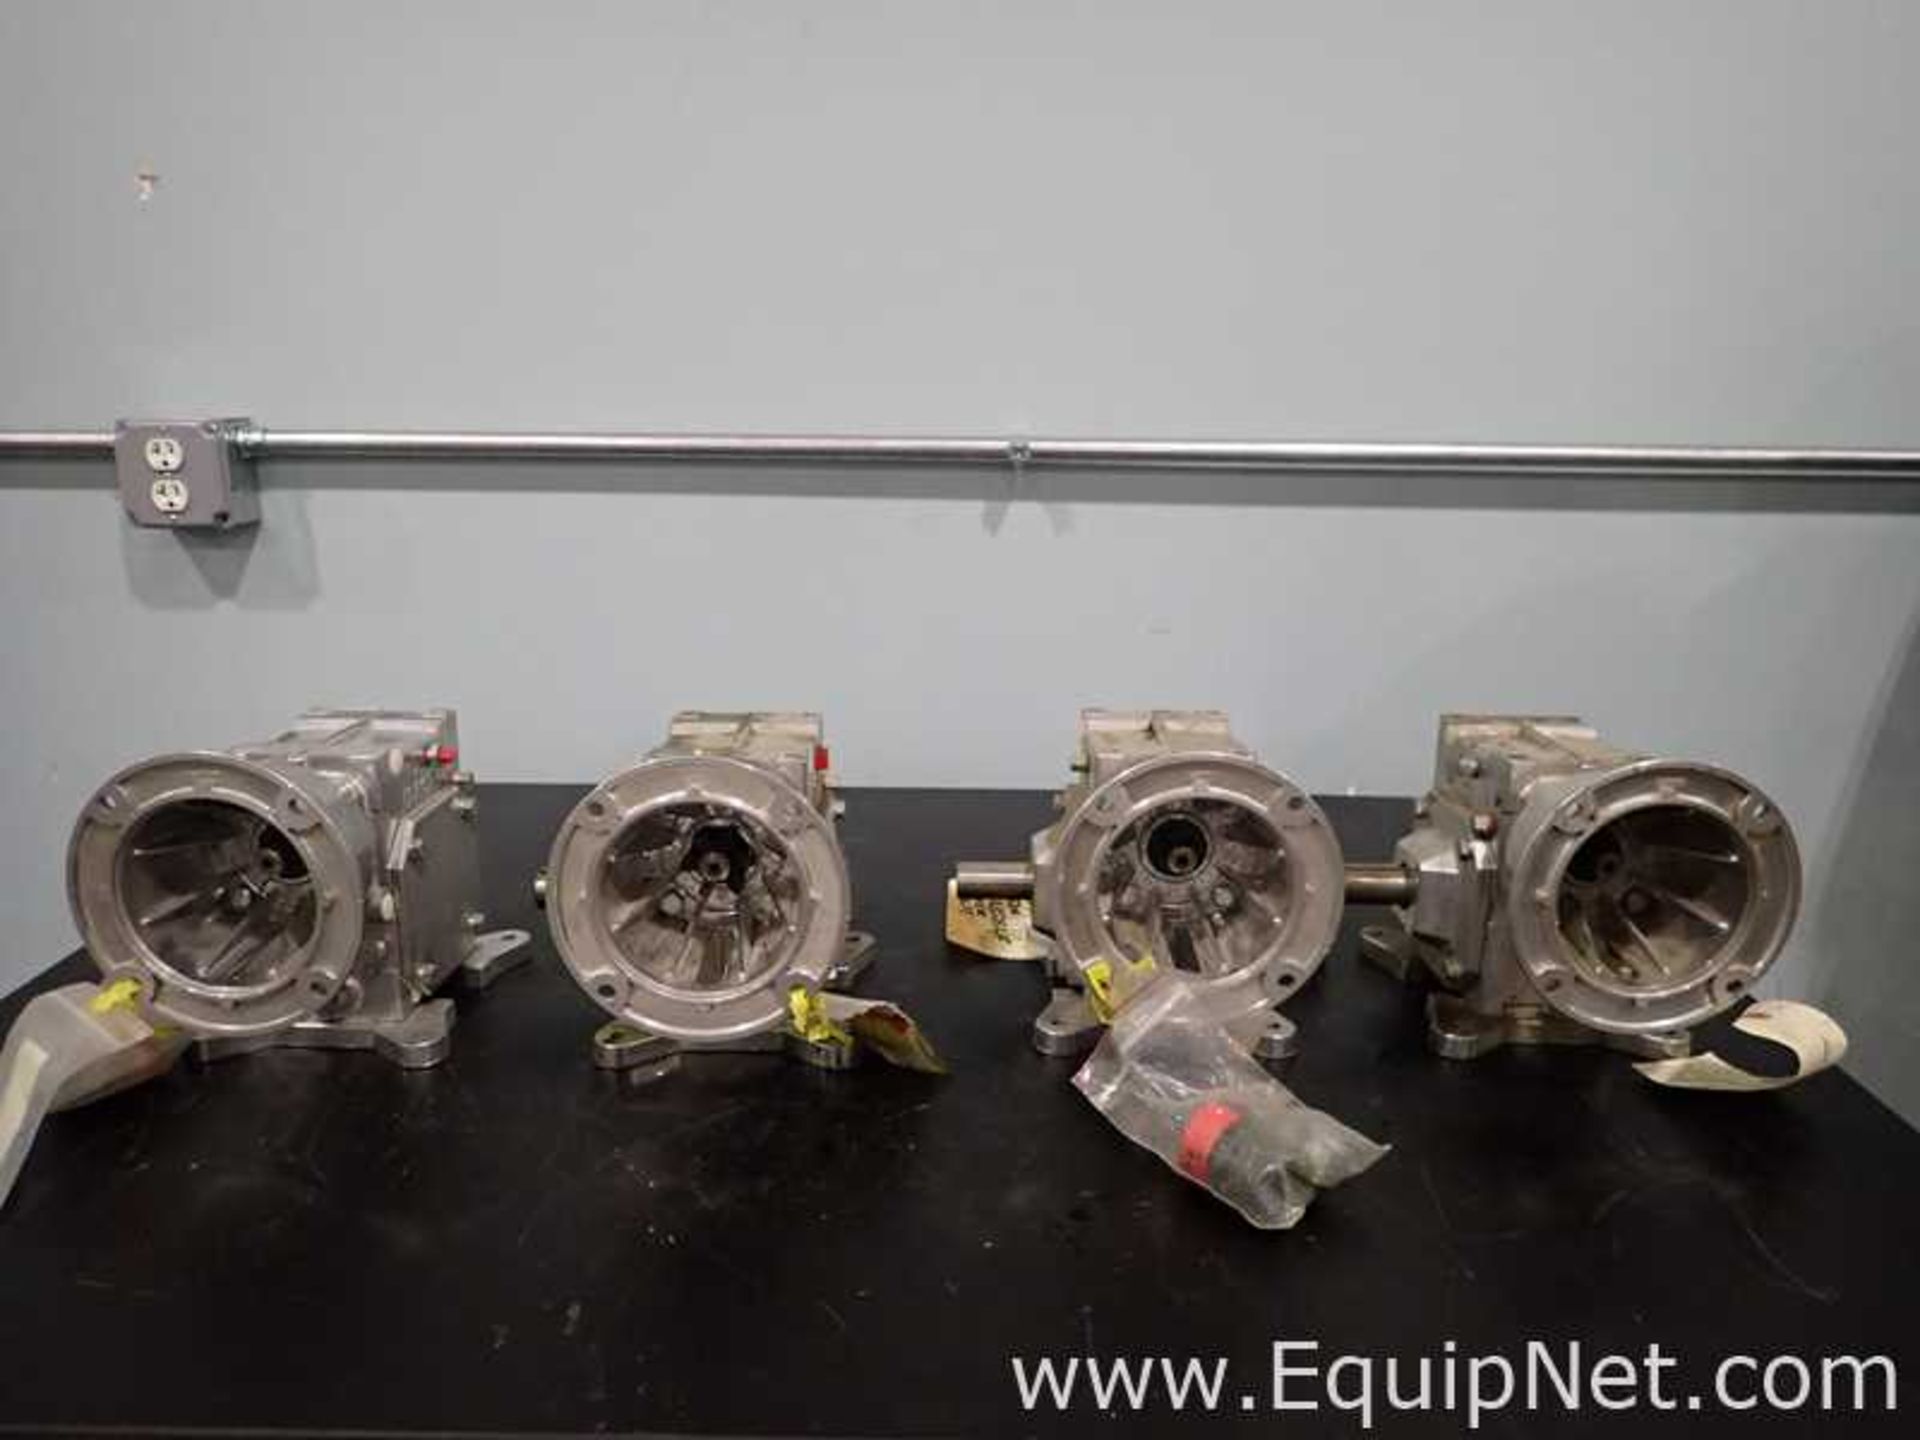 EQUIPNET LISTING #793366; REMOVAL COST: $25; DESCRIPTION: Lot of 4 Various Electra Gear Gear Boxes